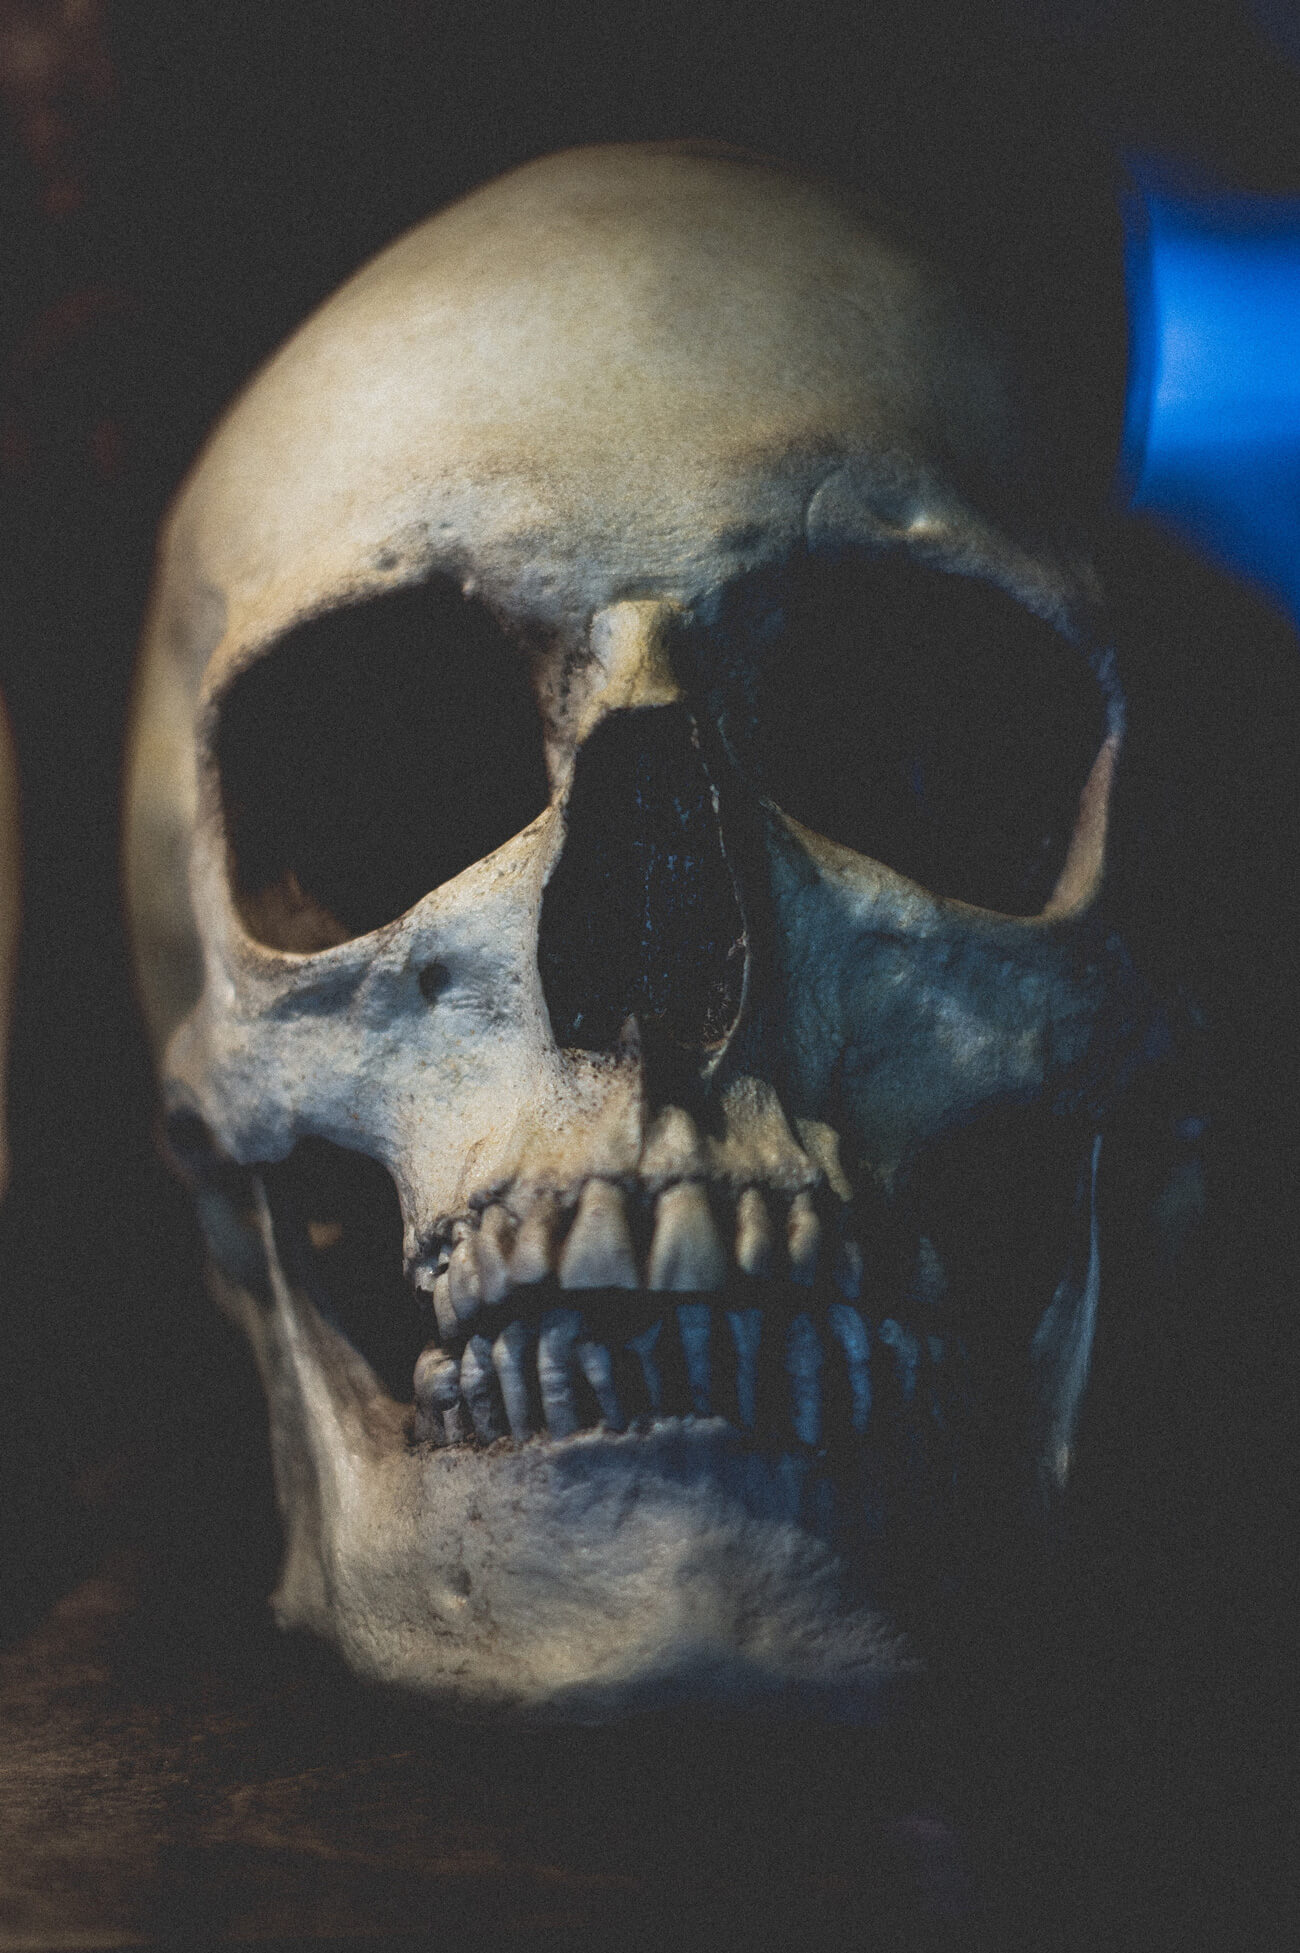 A human skull looks back. This unfortunate soul may have once been given first aid in the form of trephination. However, the angle is not clear enough to determine if this is so.